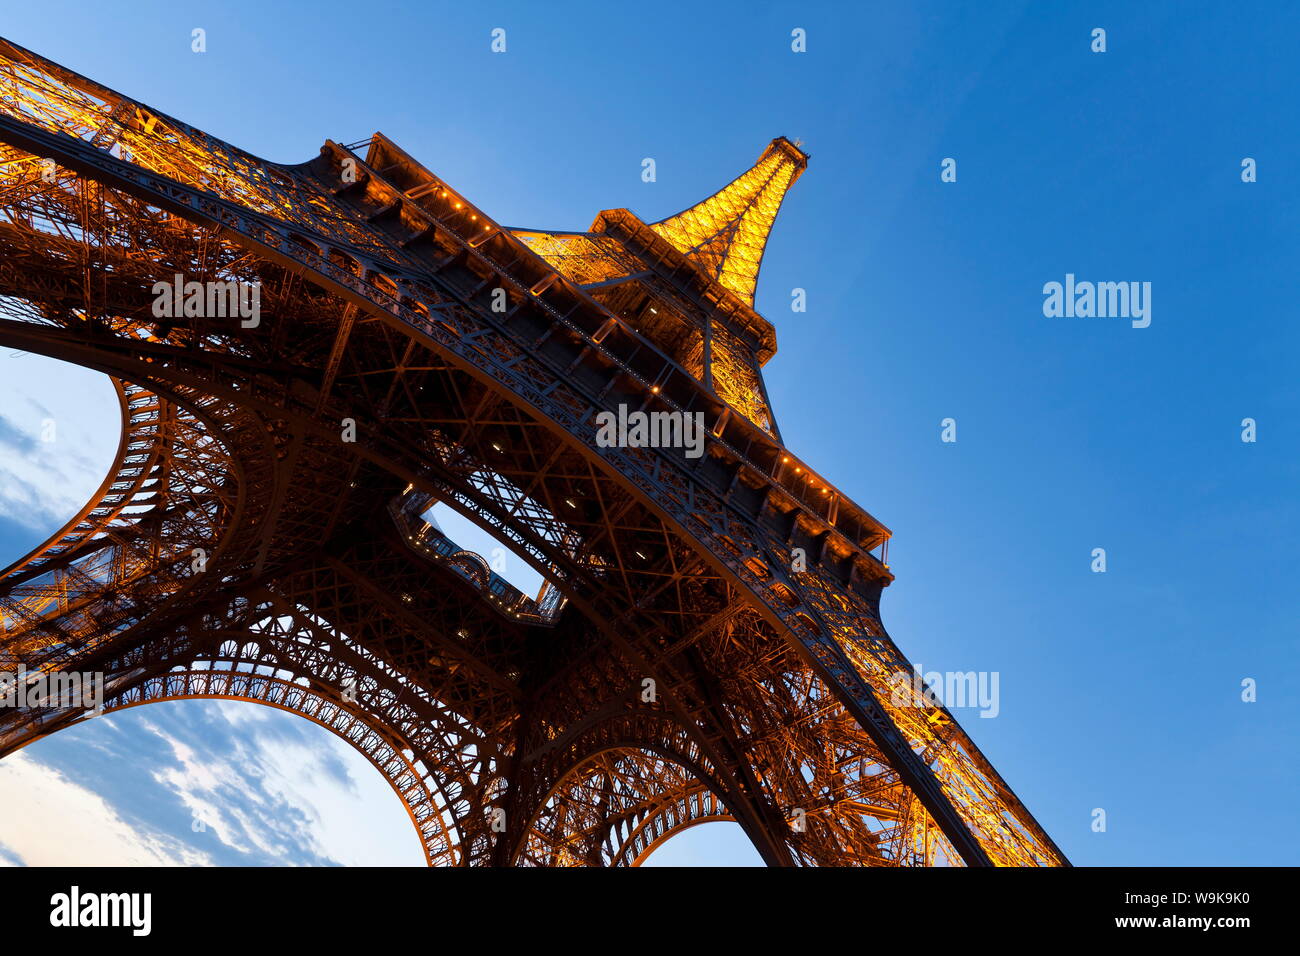 View upwards from underneath the Eiffel Tower in Paris, France, Europe Stock Photo